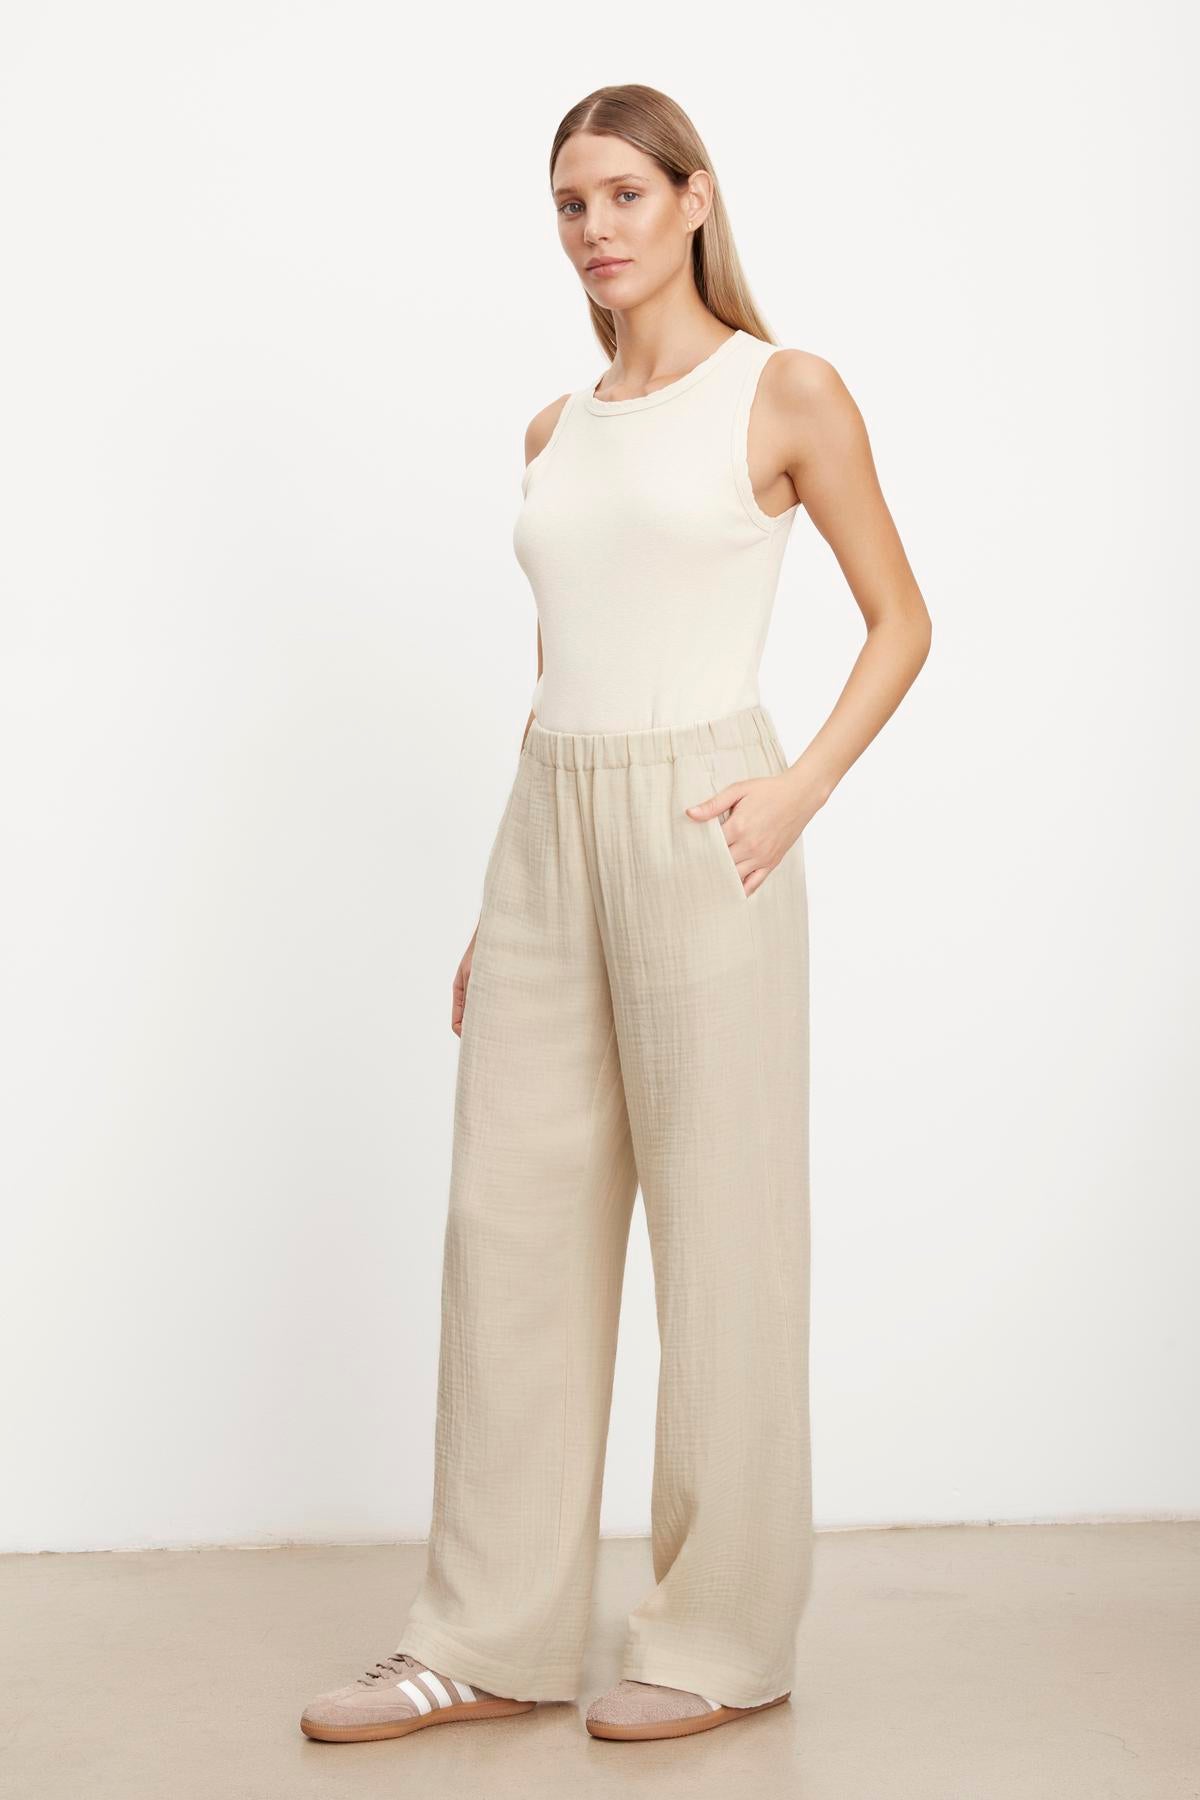 Lightweight Jerry Cotton Gauze pant in beige with an elastic waistband. (by Velvet by Graham & Spencer)-35755555586241